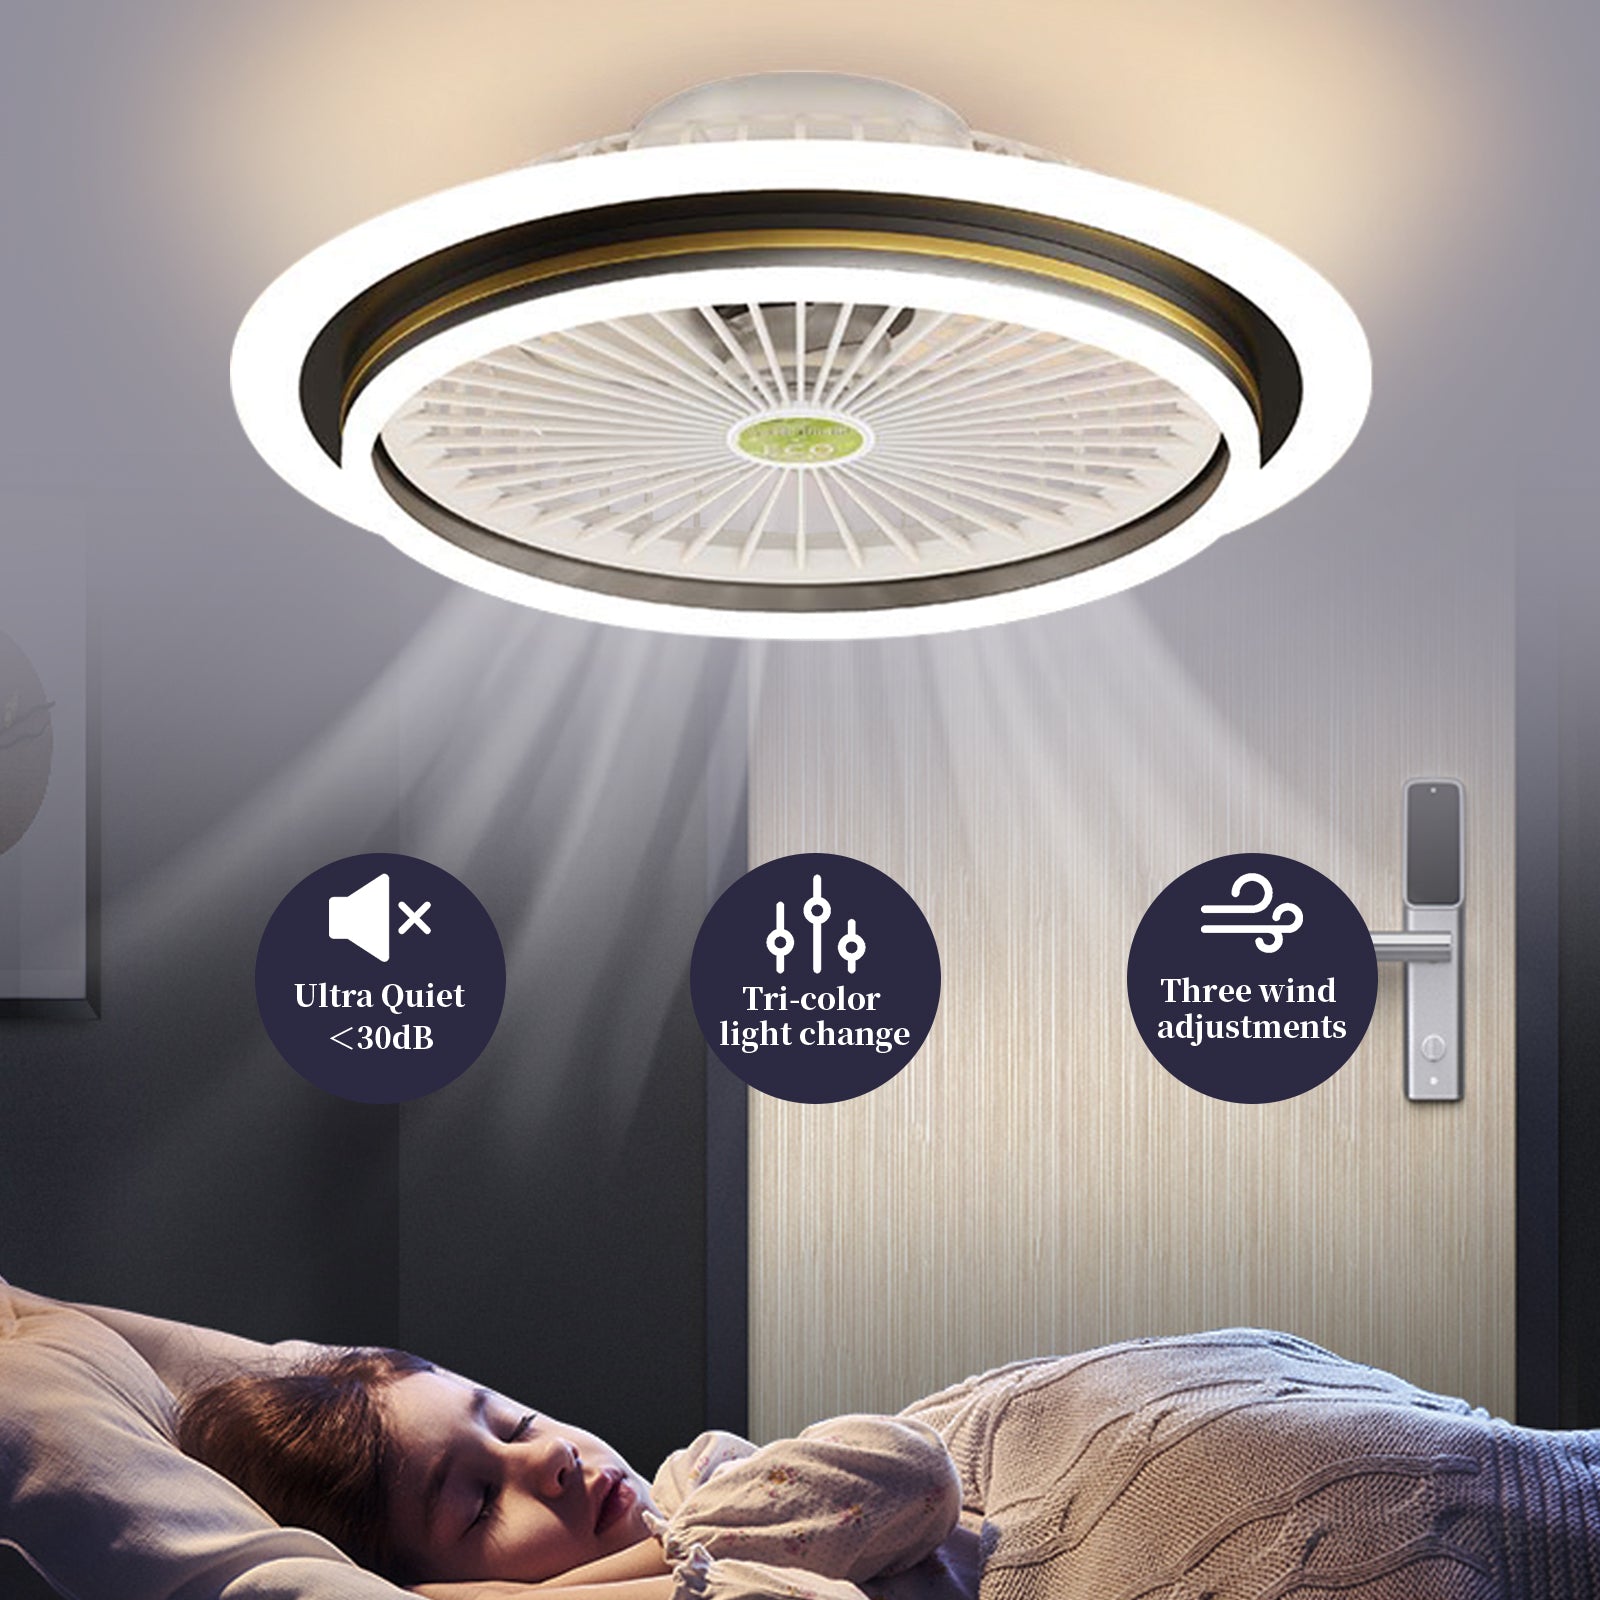 Modern Ceiling Fan Led Acrylic Lamp Is Suitable For Bedroom, Children's room，Dining Room And Living Room.